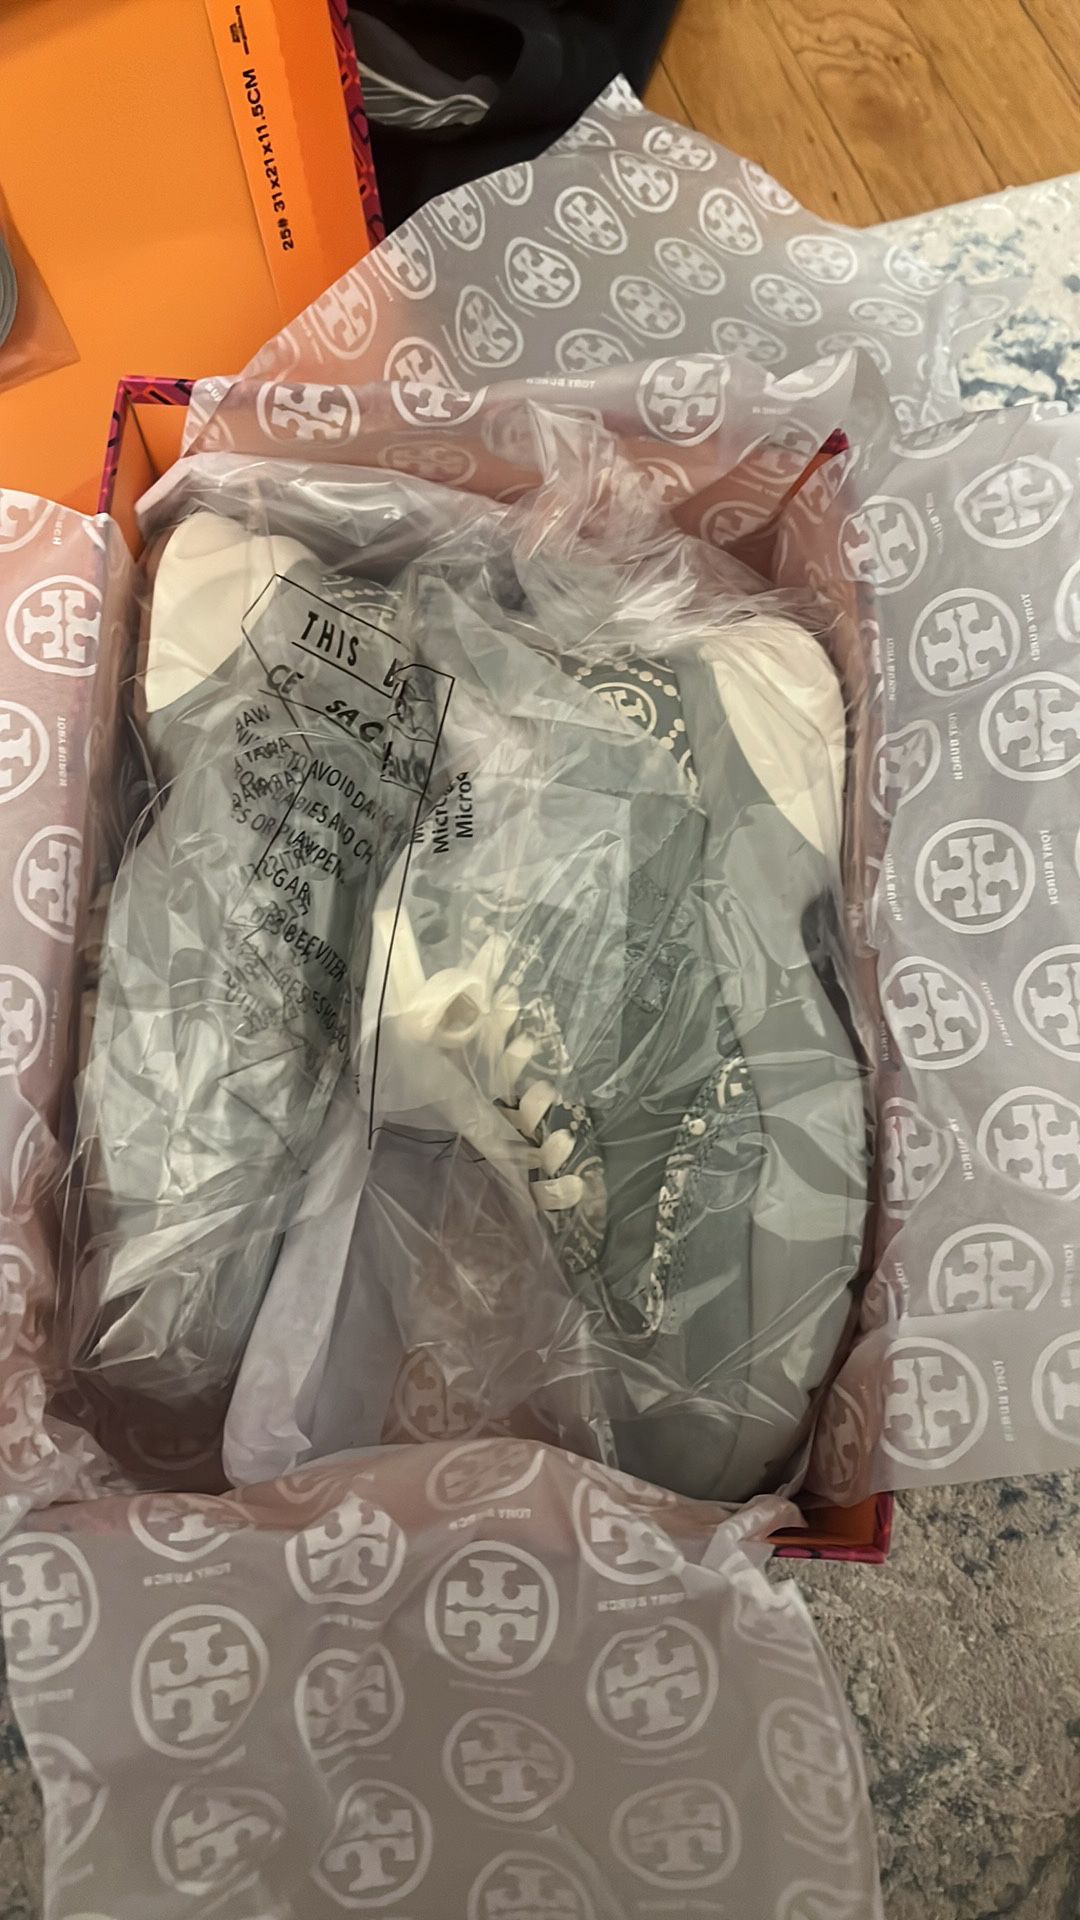 Tory Burch Size 7 for Sale in Chicago, IL - OfferUp